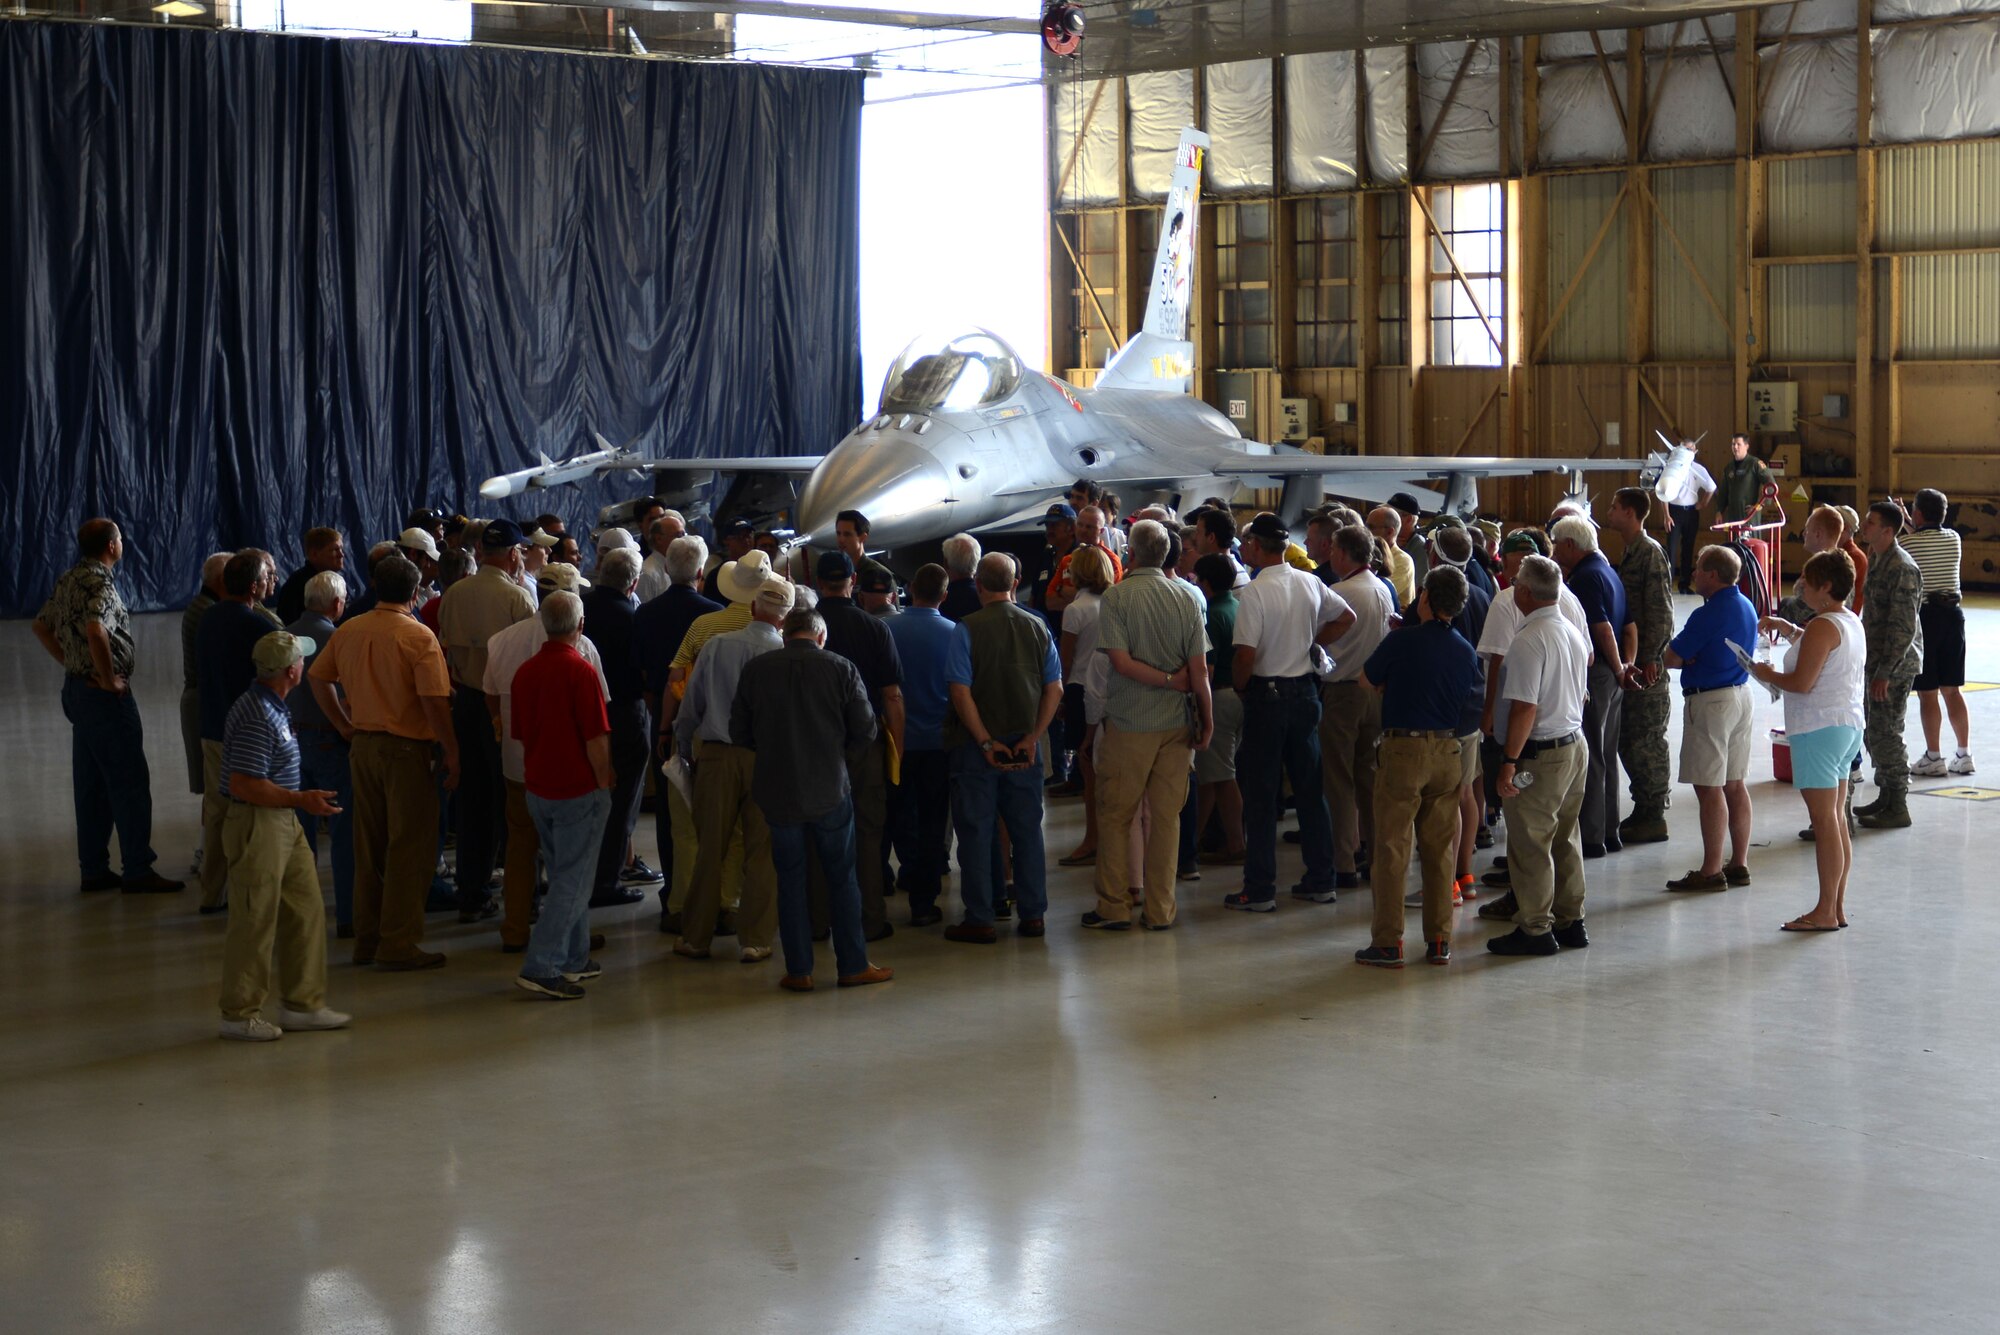 Visitors gather around an F-16CM Fighting Falcon as U.S. Air Force Maj. Matthew Feeman, 20th Operations Support Squadron wing weapons, describes its parts and function at Shaw Air Force Base, S.C., April 29, 2016. The static F-16 display was the last stop of the tour before the event came to a close. (U.S. Air Force photo by Airman 1st Class Kelsey Tucker)